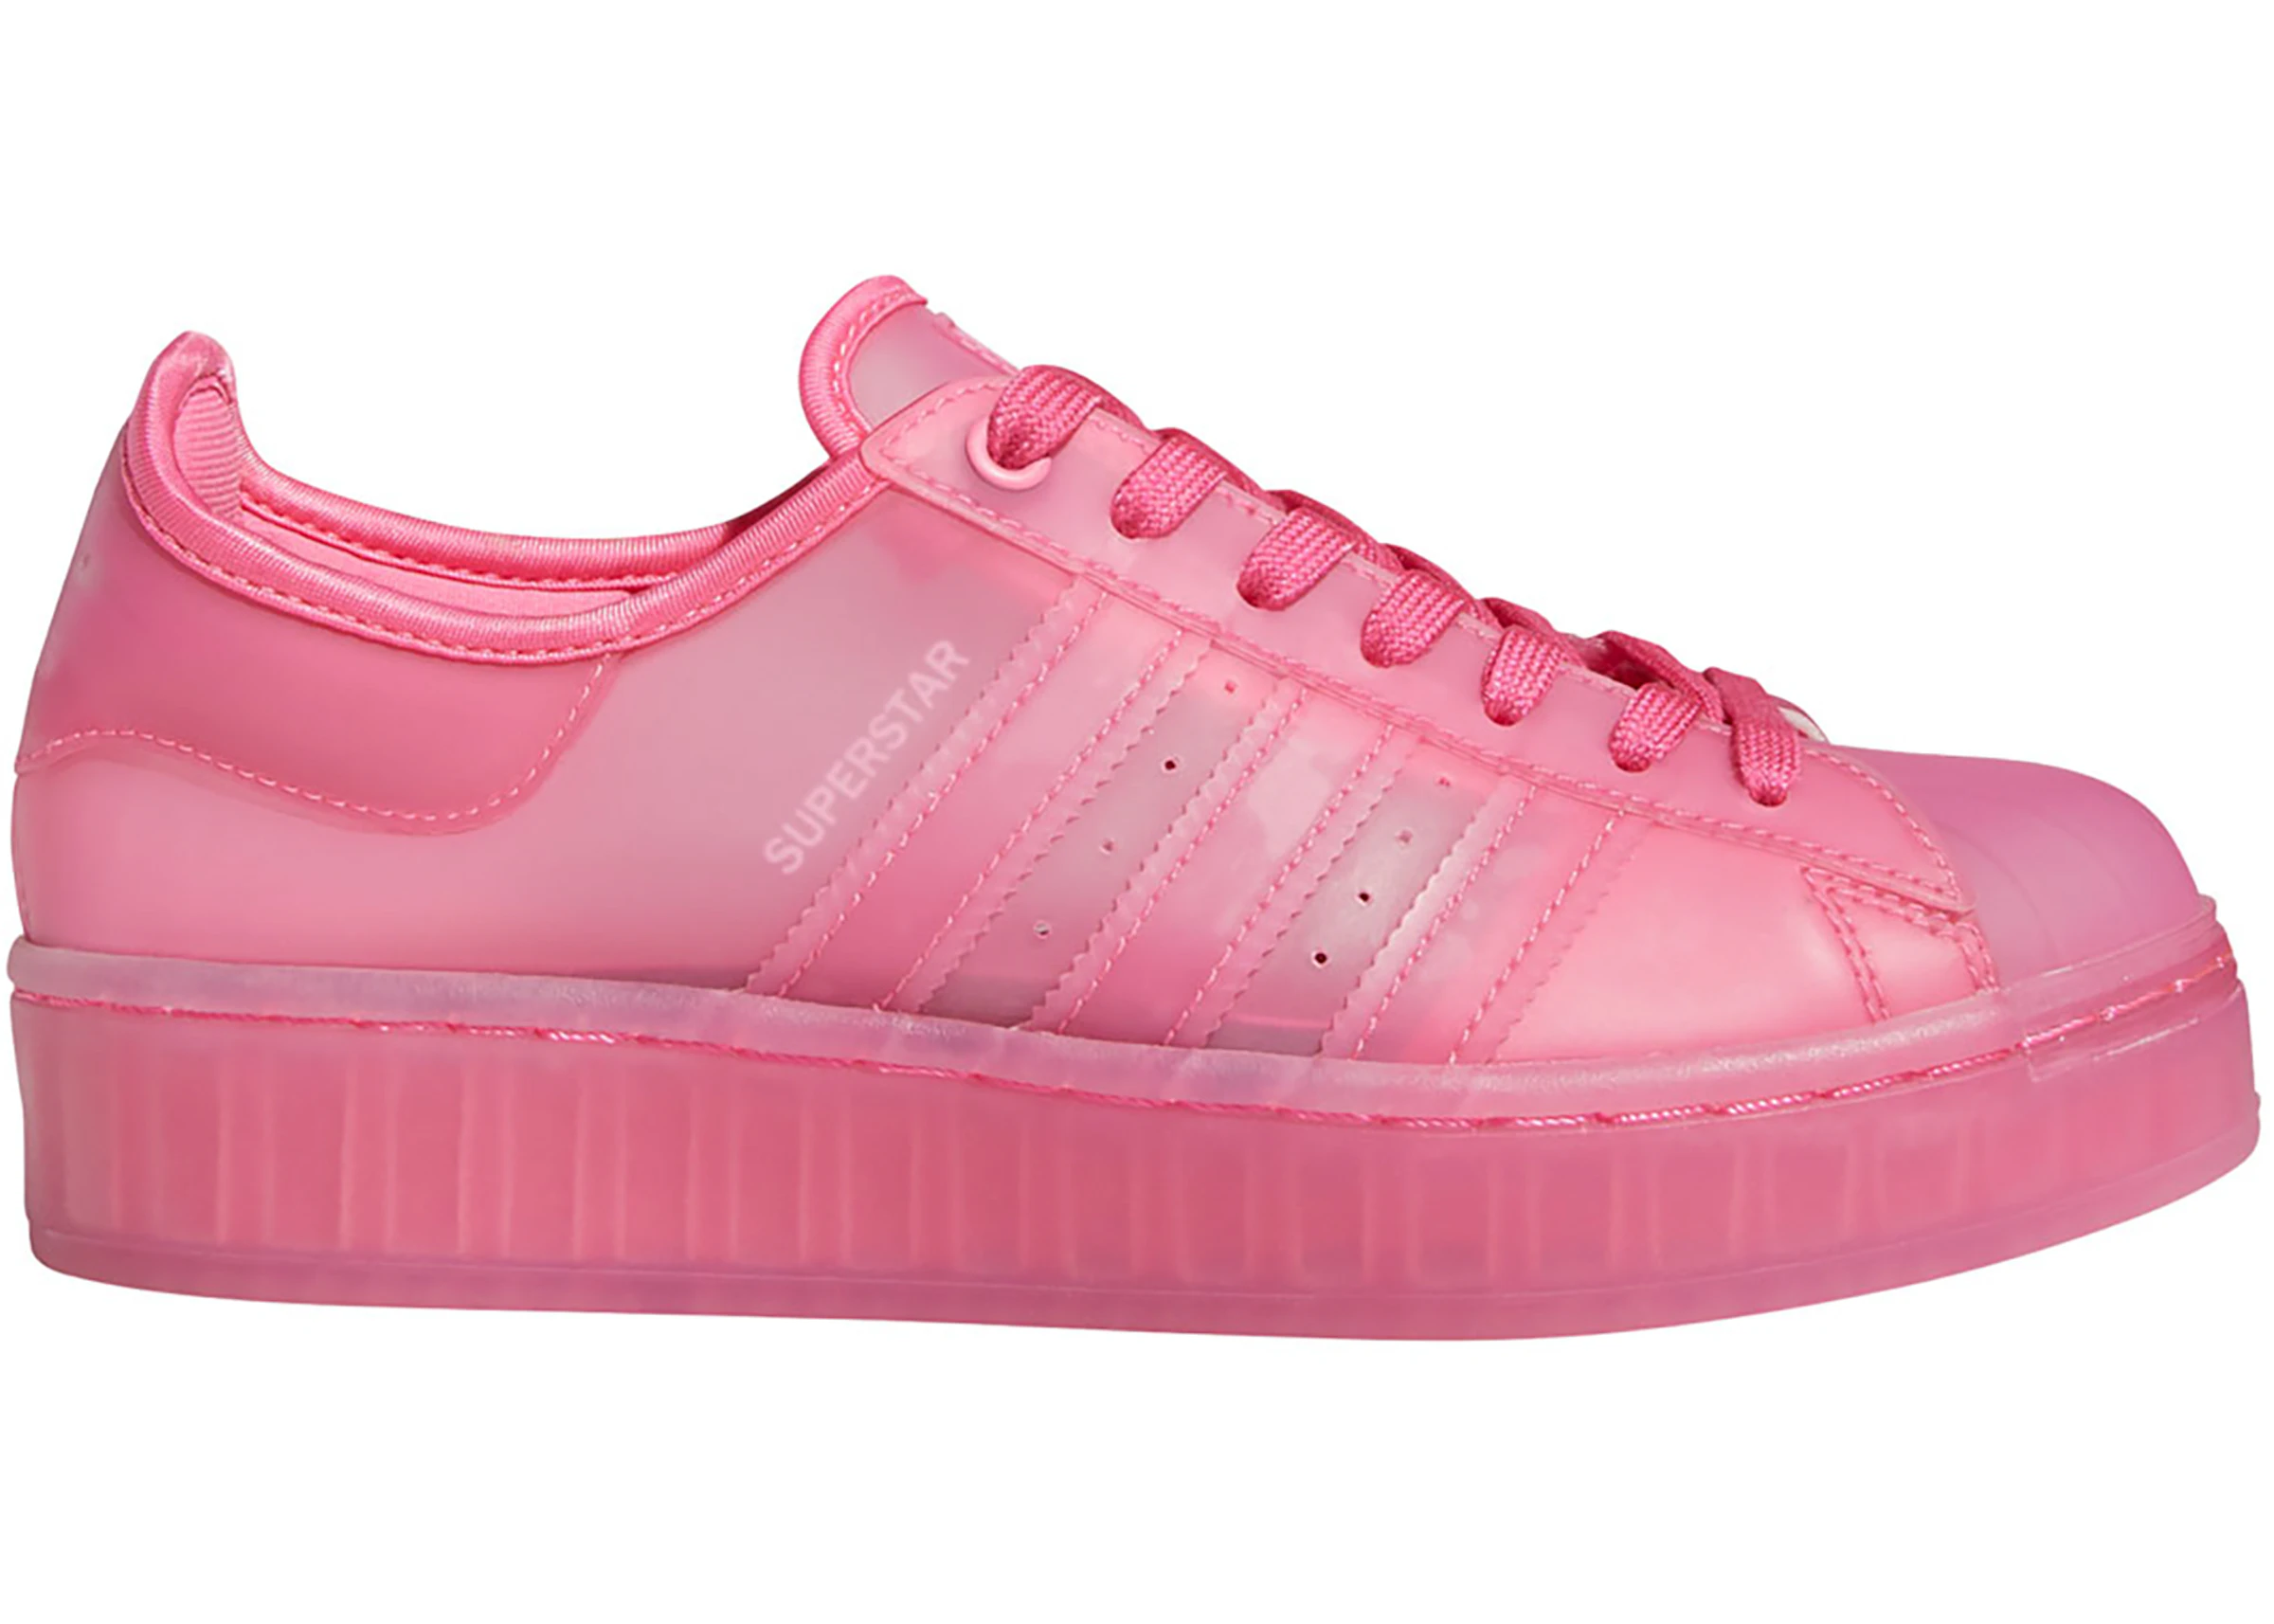 Sprinkle about Charles Keasing adidas Superstar Jelly Semi Solar Pink (W) - FX4322 - US